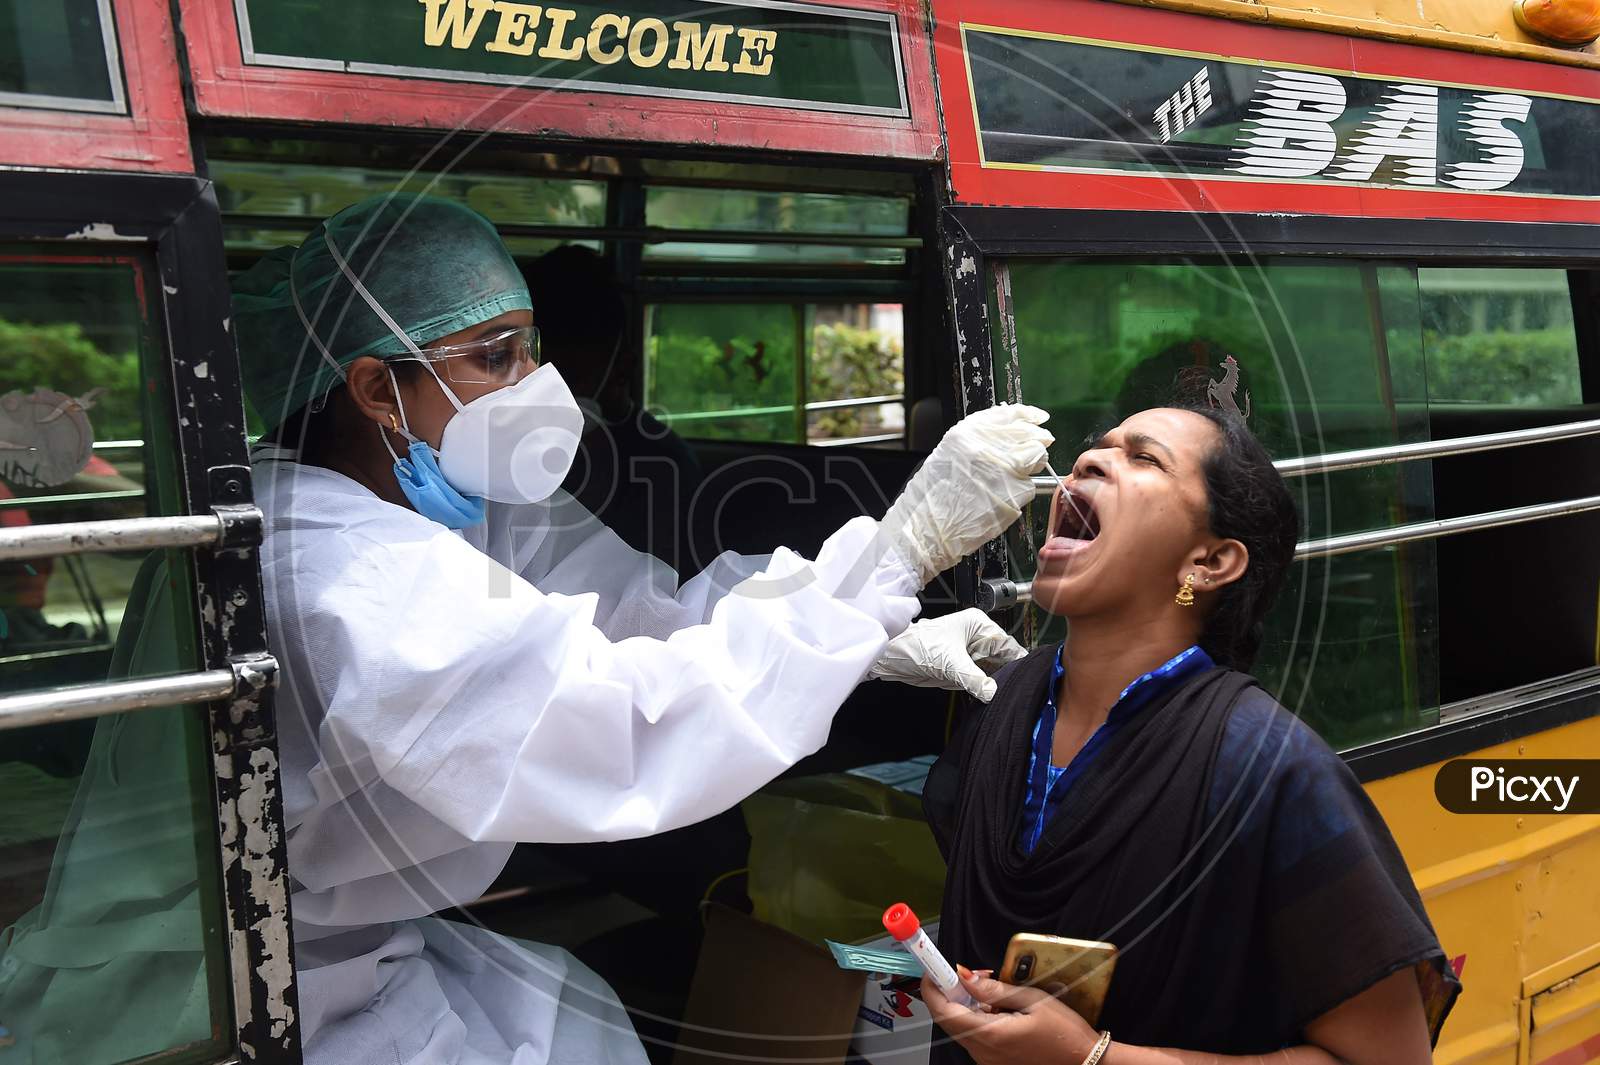 A Health Worker Wearing Personal Protective Equipments (Ppe) Suit, Sits In A Share Auto-Rickshaw As She Collects A Swab Sample From A Women To Test For The Covid-19 Coronavirus, Outside A Commercial Centre In Chennai On September 15, 2020.